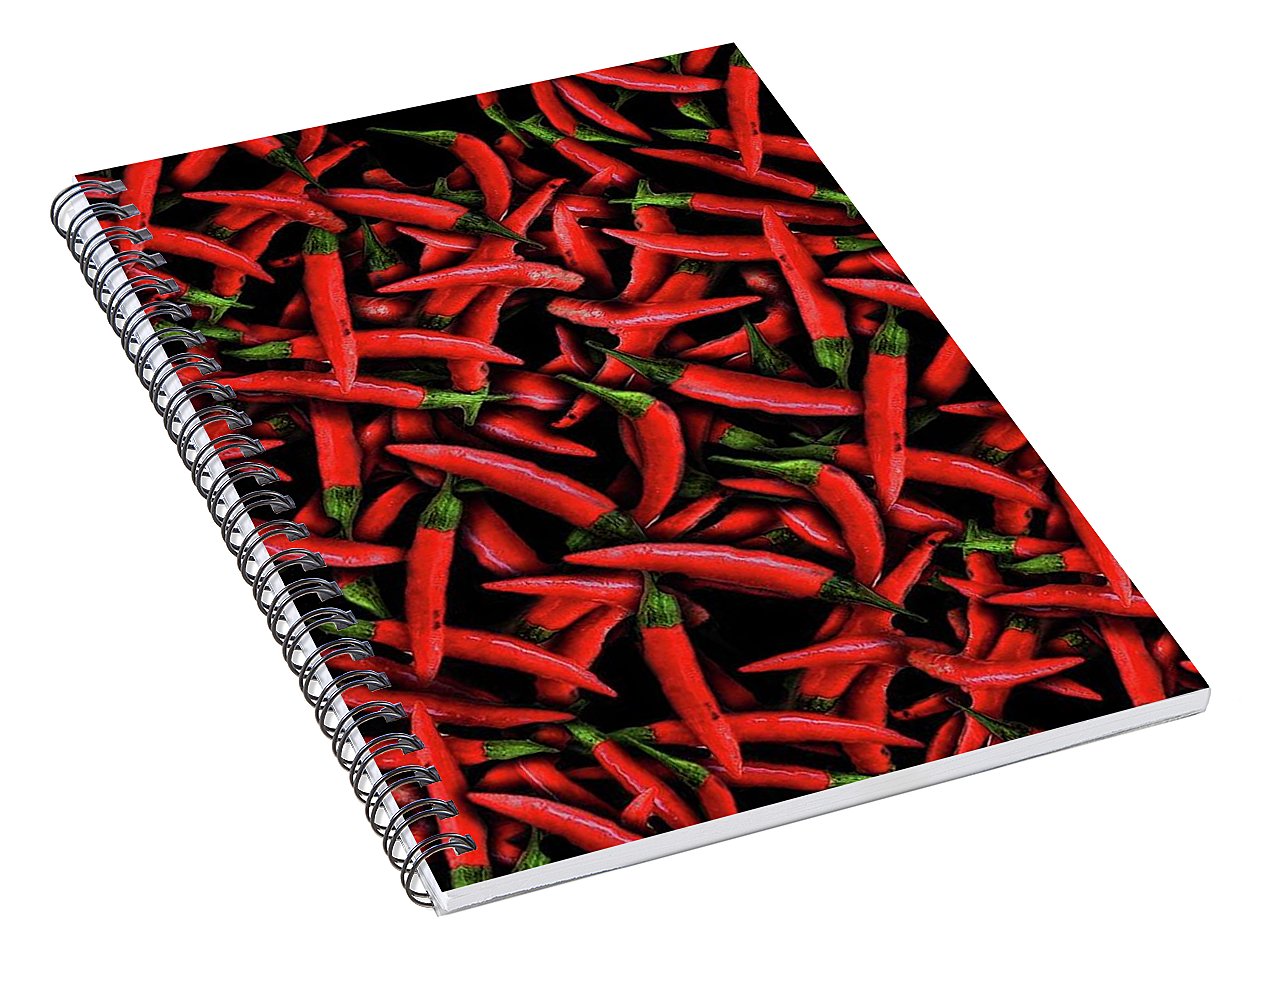 Red Chili Peppers Pattern - Spiral Notebook